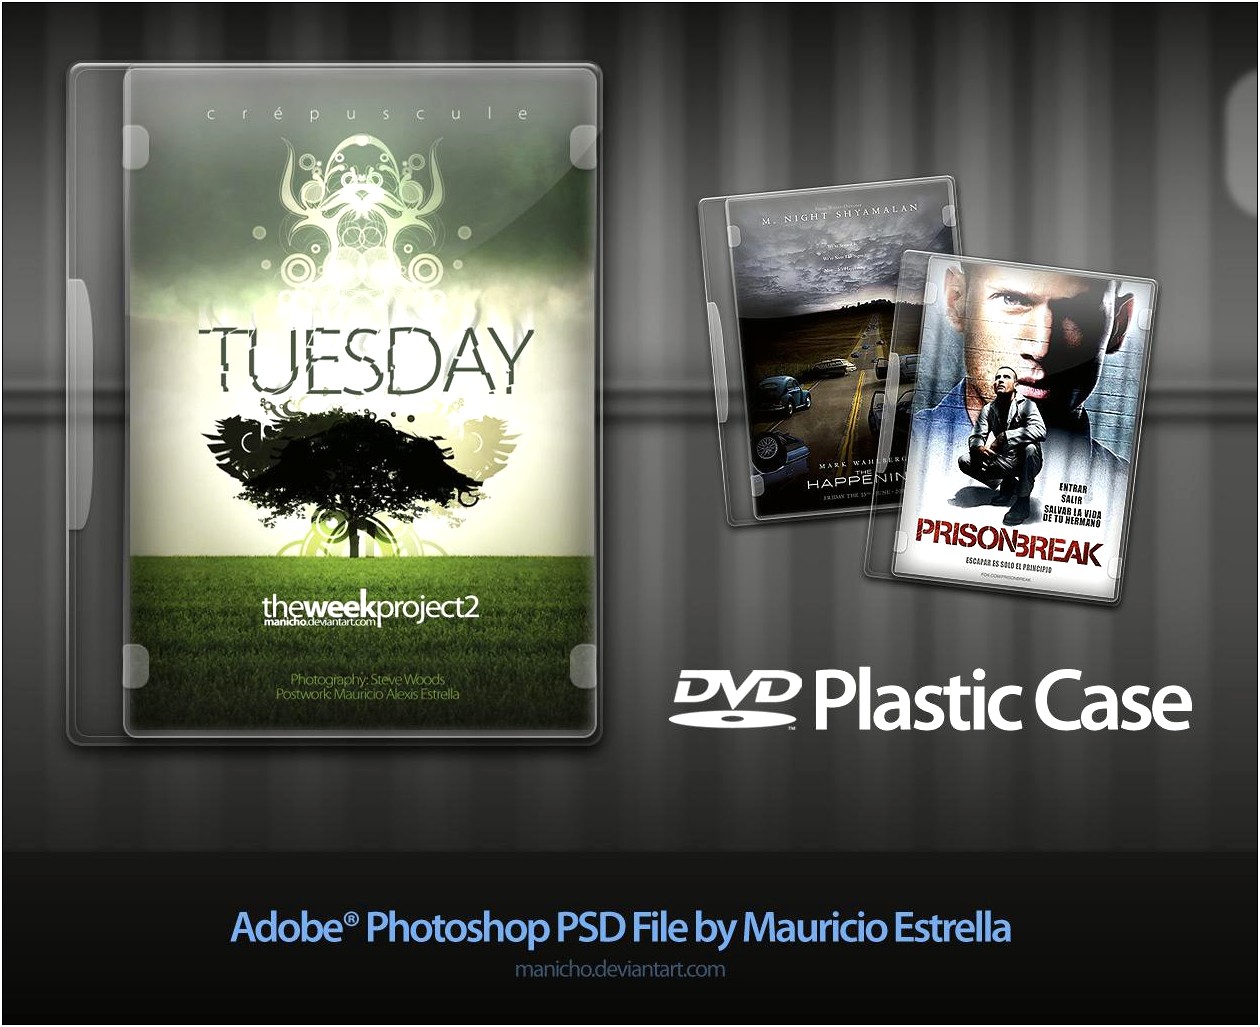 Adobe Photoshop Dvd Cover Template Download